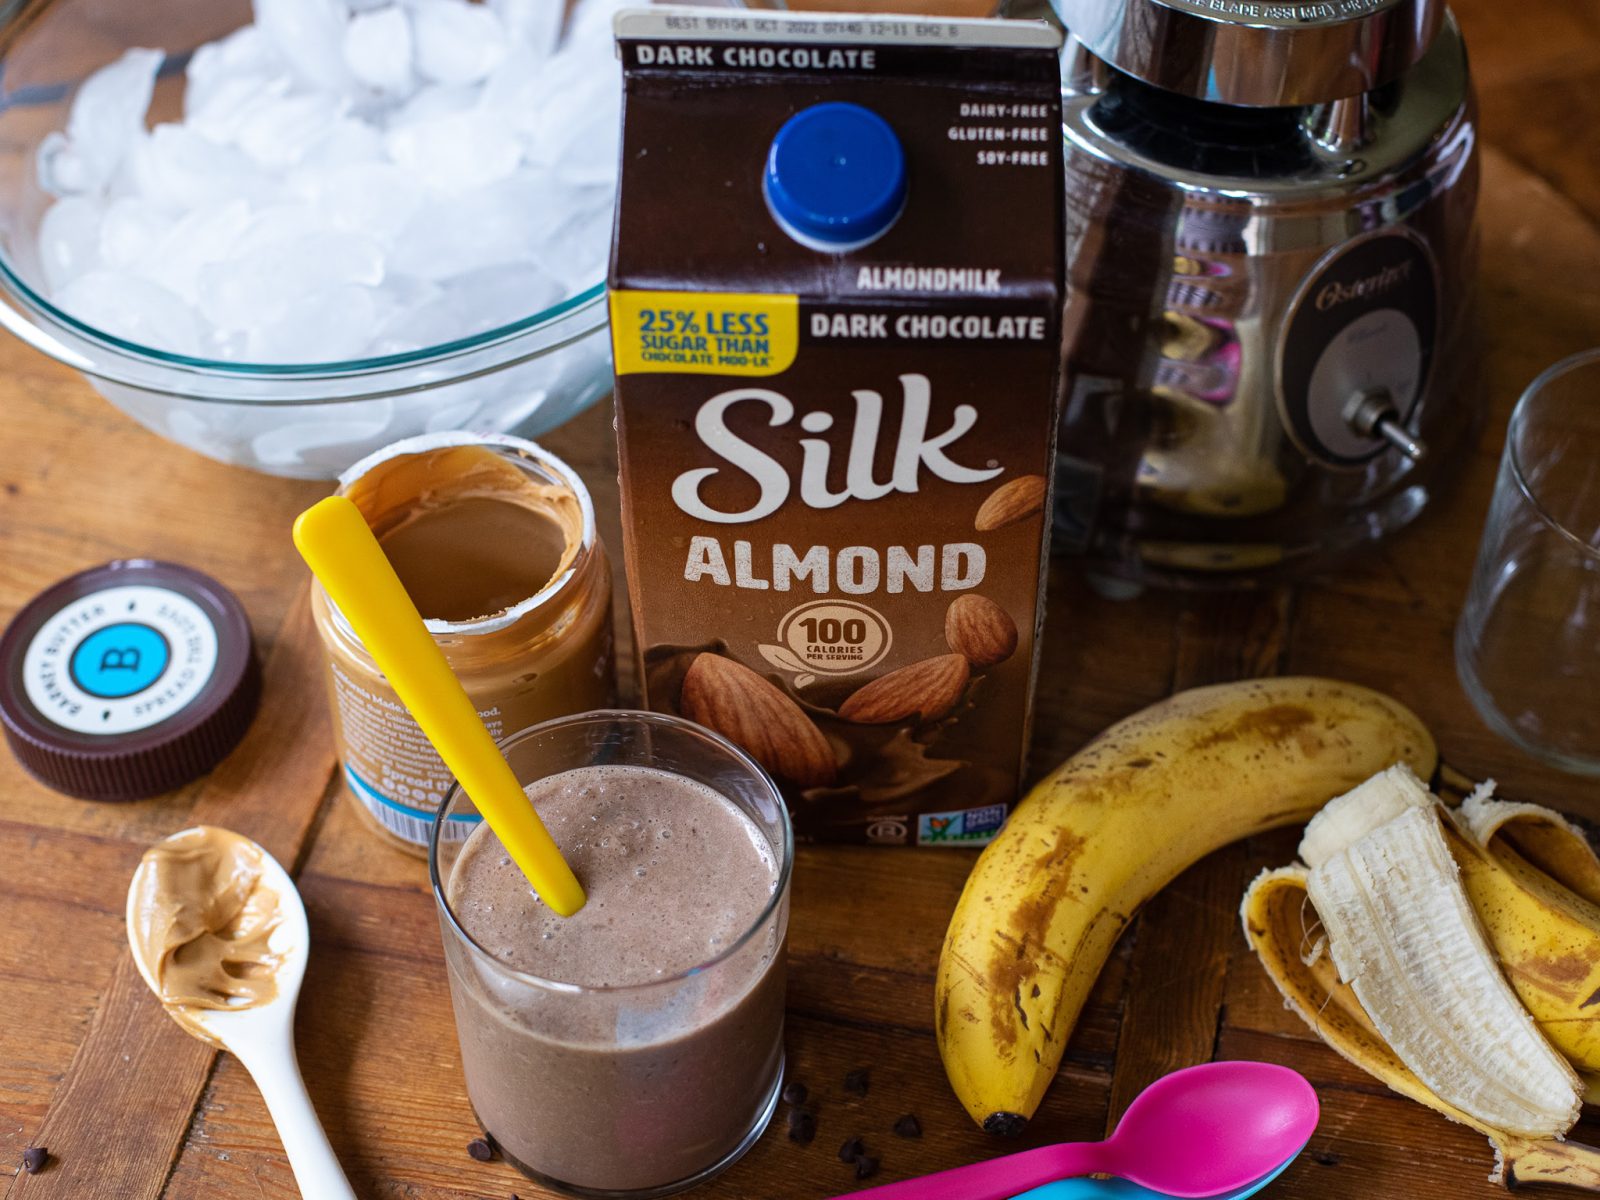 Don’t Miss Your Chance To Score $3 Savings On Silk & So Delicious Products At Publix